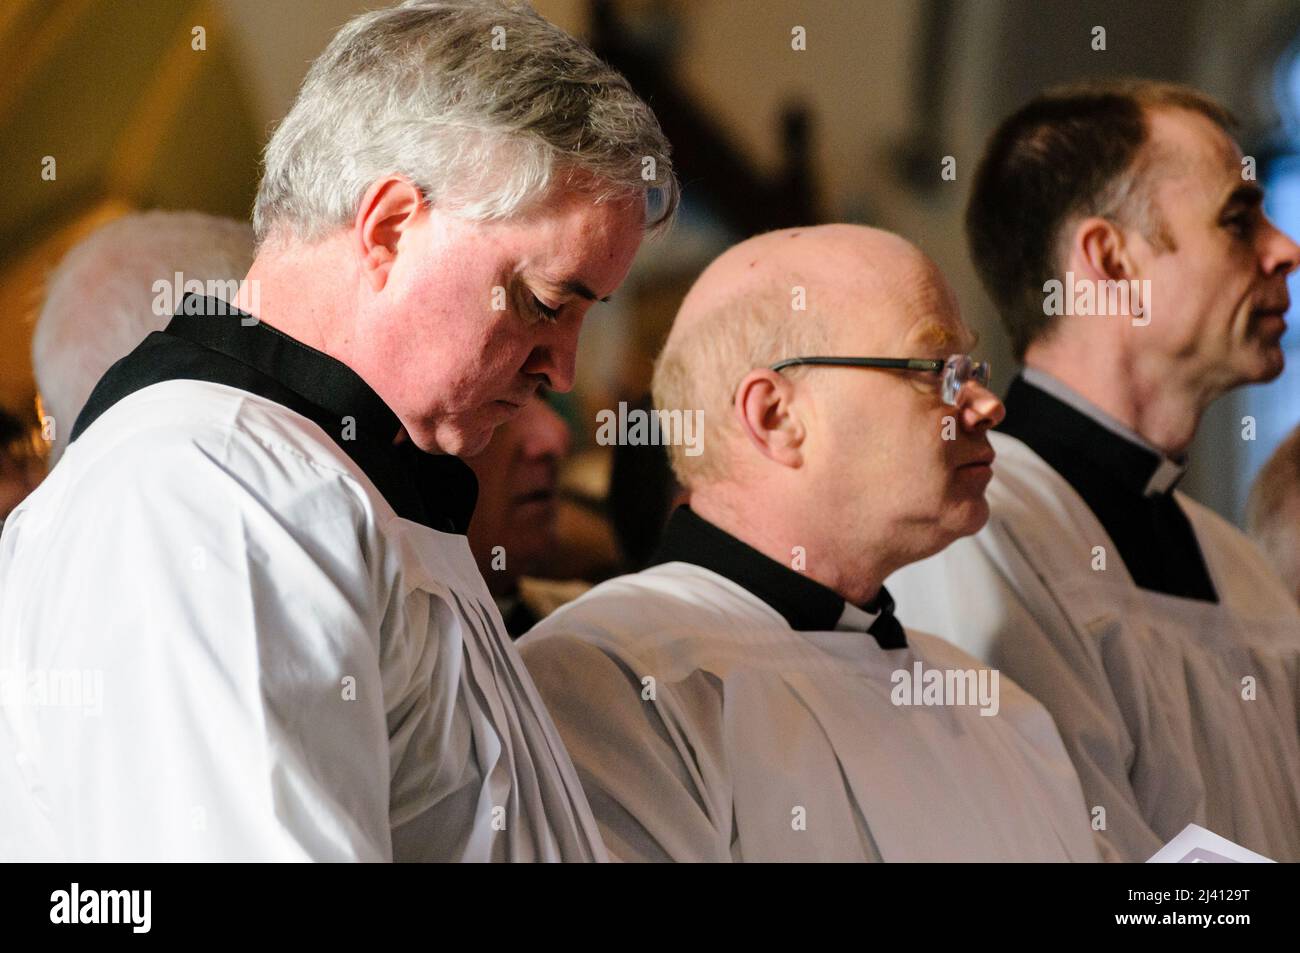 Belfast, Northern Ireland. 2nd January 2010. Priests gather for the requiem mass of Cardinal Cahal Daly at Saint Peter's Cathedral. Stock Photo